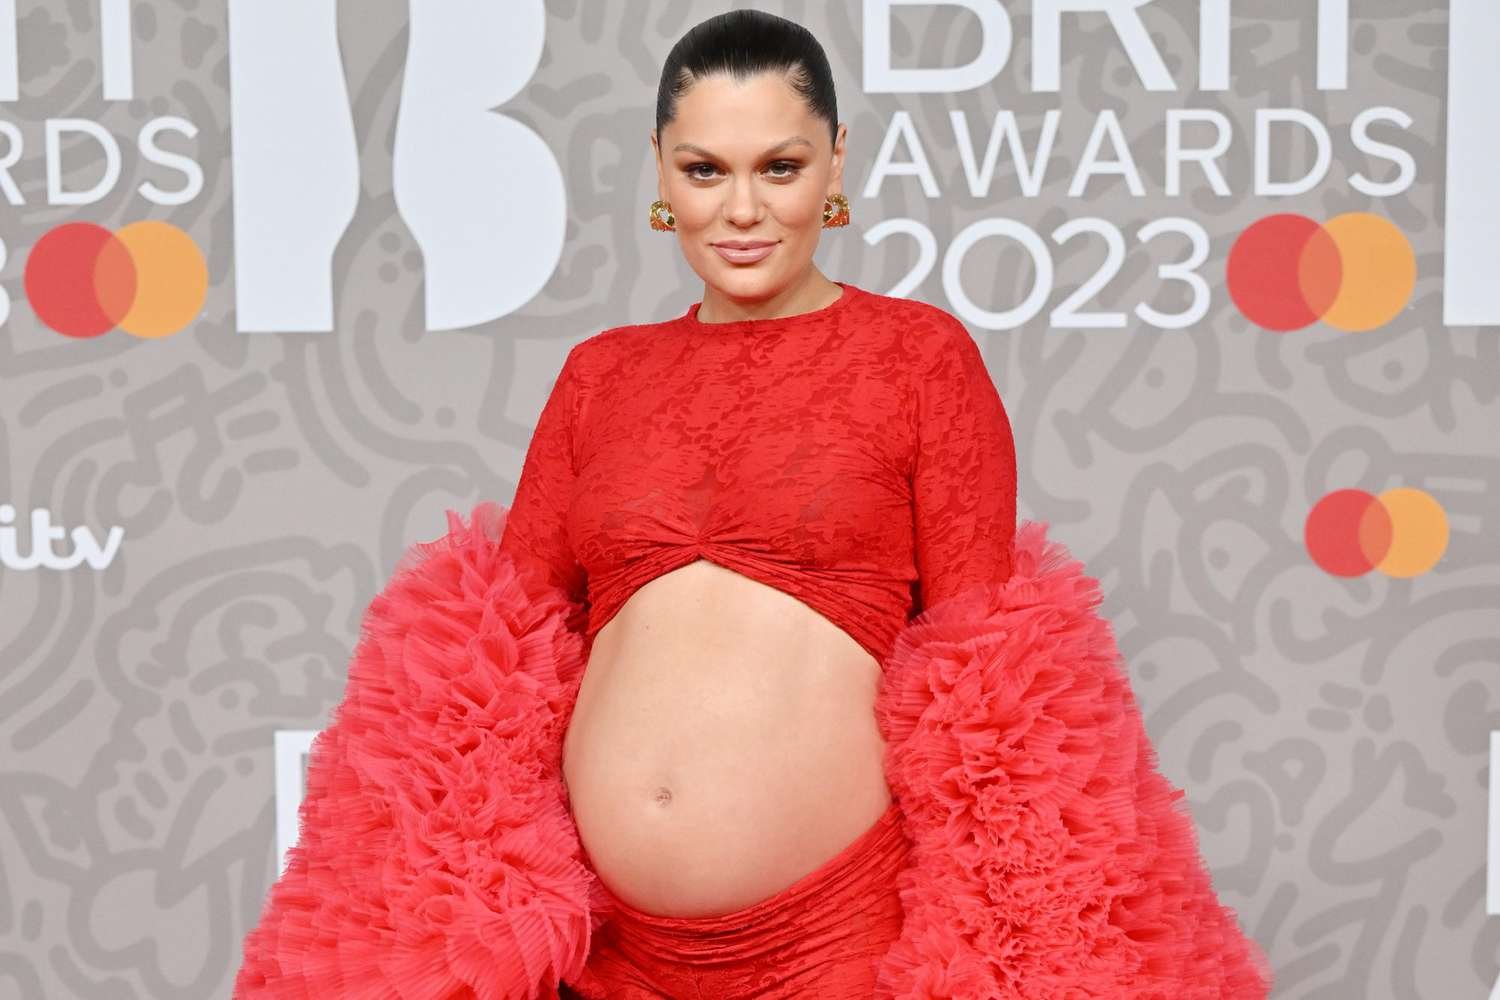 Pregnant Jessie J Reveals She's Having a Baby Boy, Shows Bump at BRITs